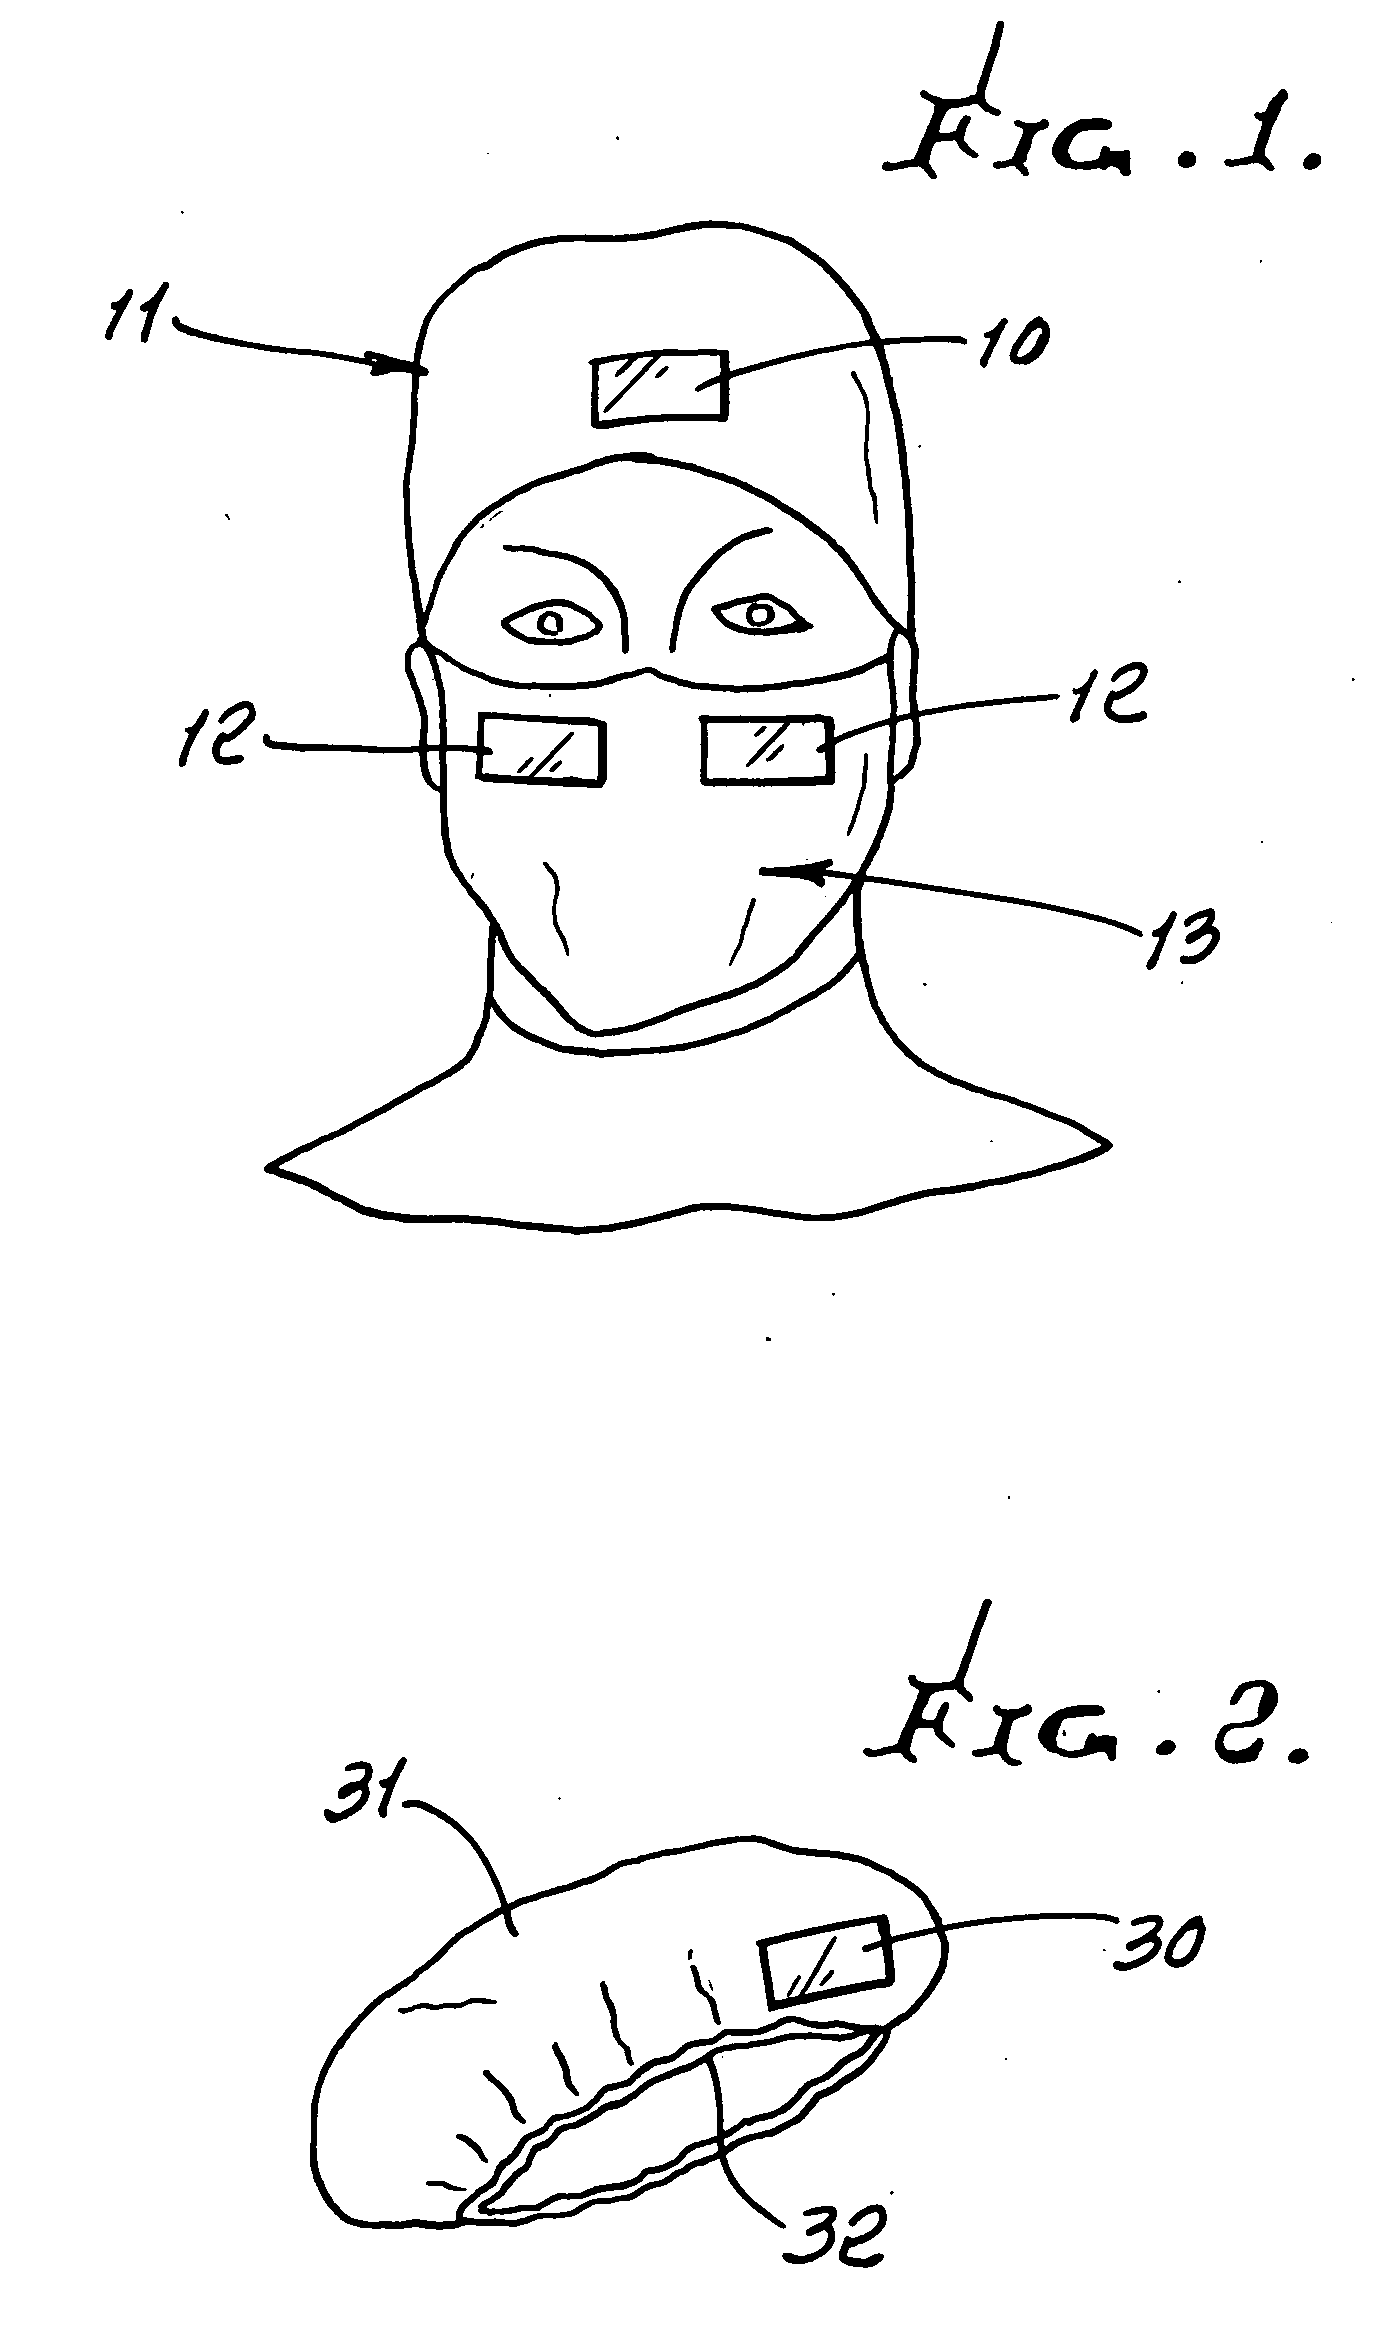 Identification of personnel attending surgery or medical related procedure